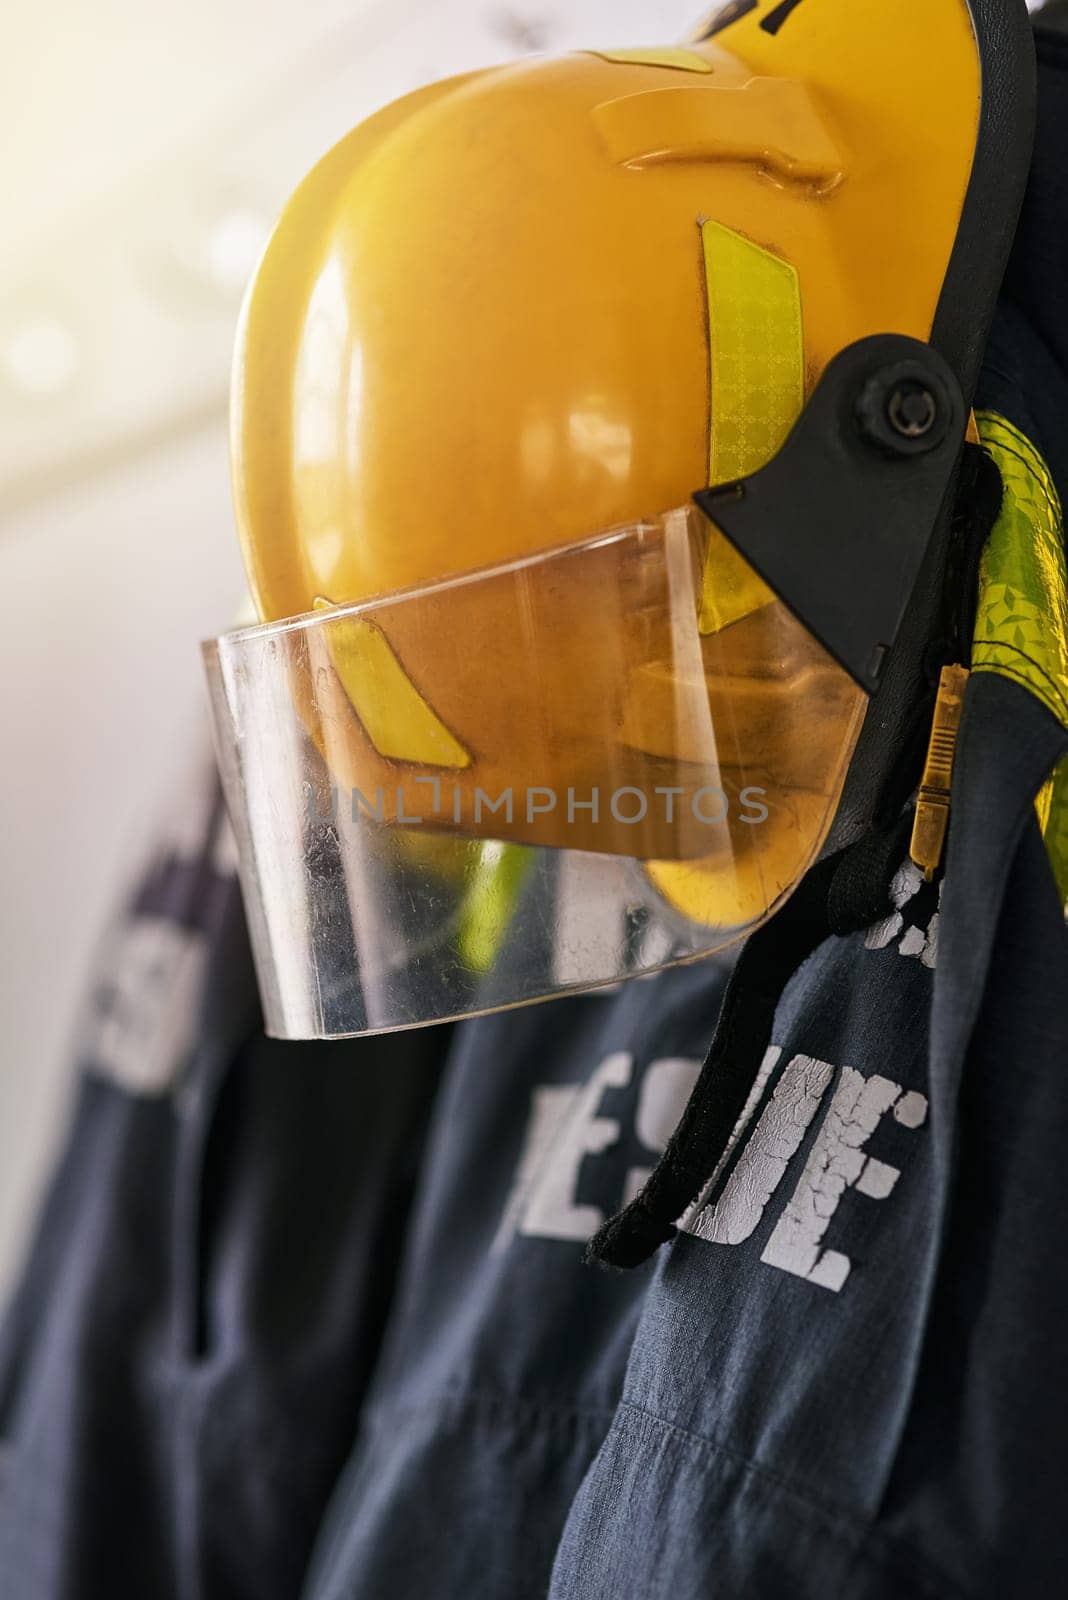 Uniform, helmet and clothes of firefighter on wall for rescue, emergency service and protection. Fire brigade, safety gear and equipment, outfit and ppe on rack for health department in station by YuriArcurs